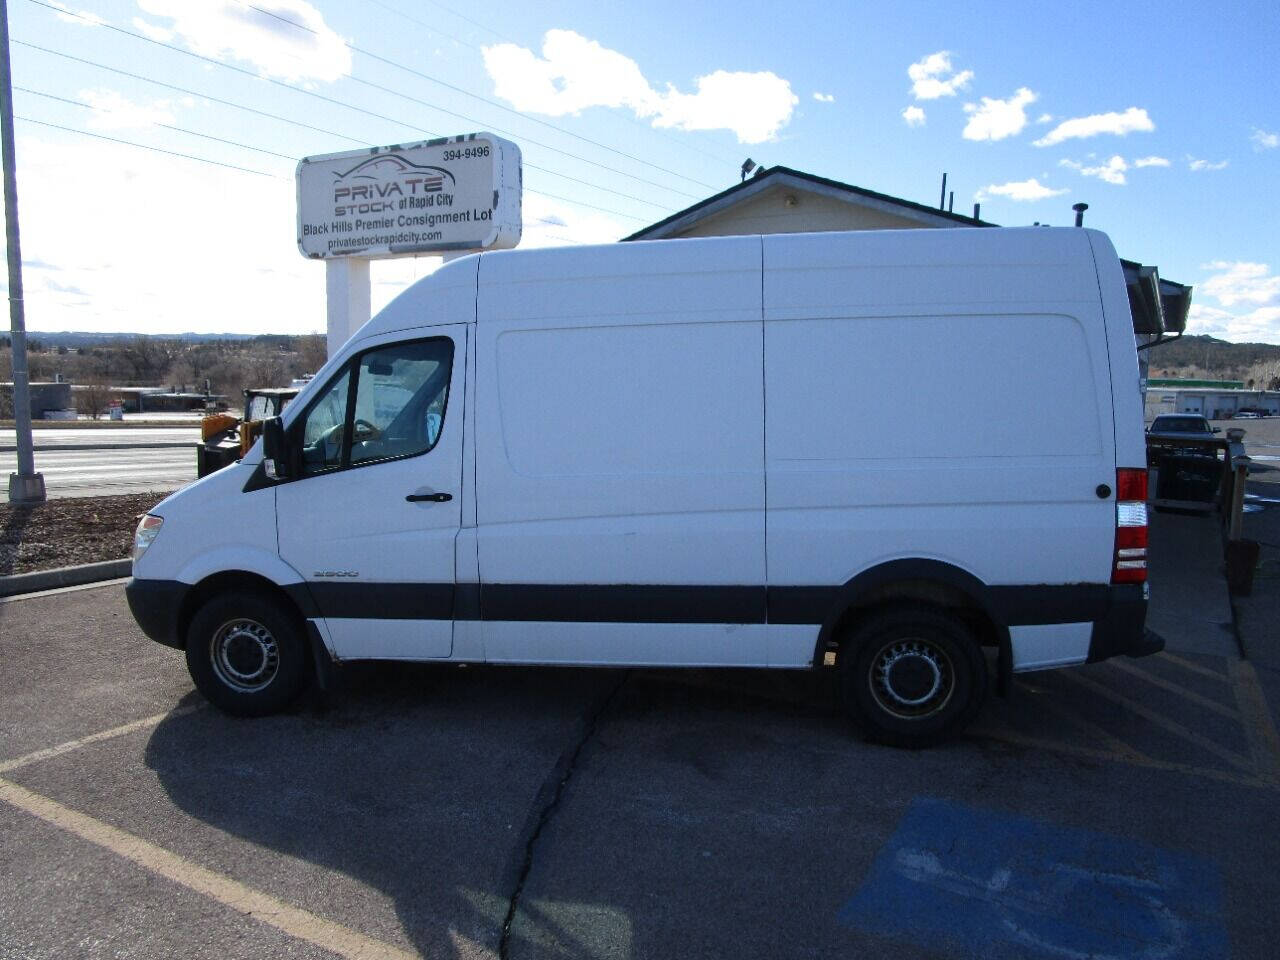 For Sale Used 2008 Dodge Sprinter 2500 BraunAbility UVL High Roof